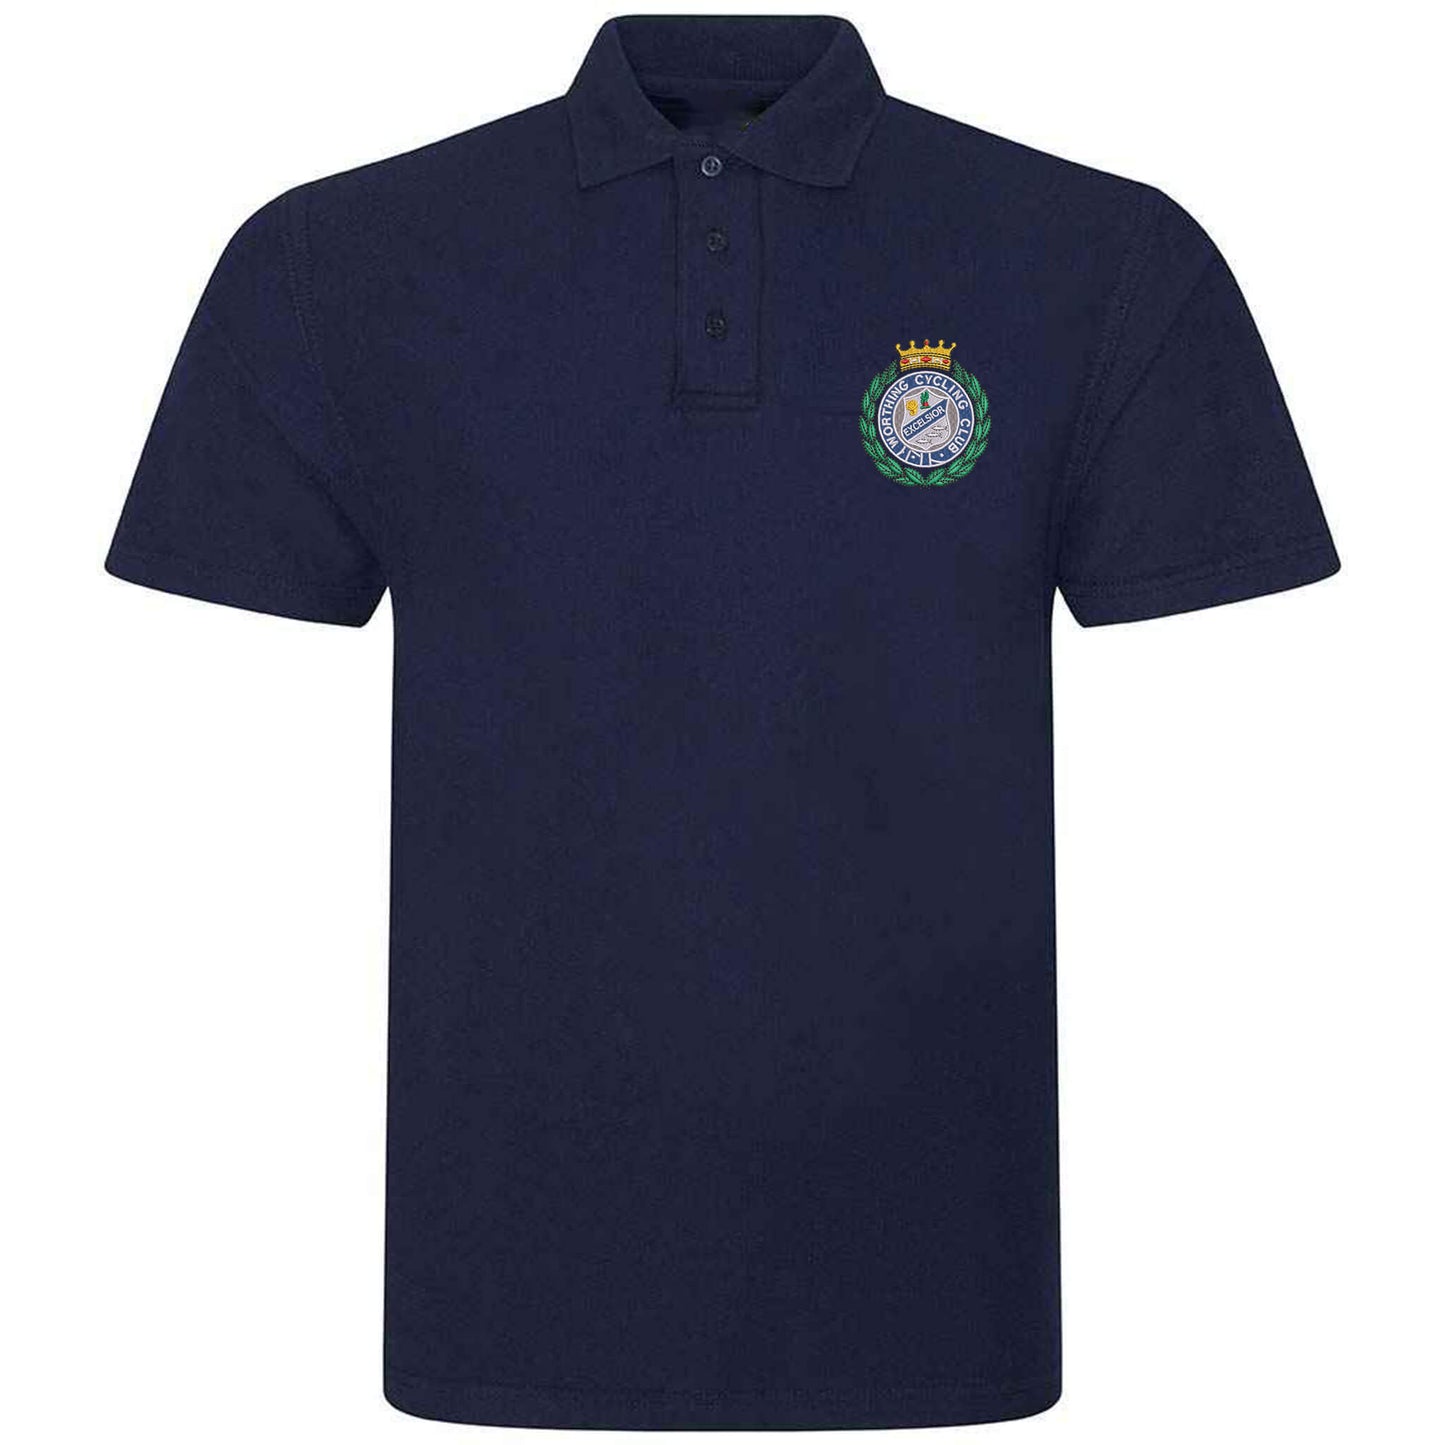 Worthing Excelsior Cycling Club Embroidered Polo Shirt